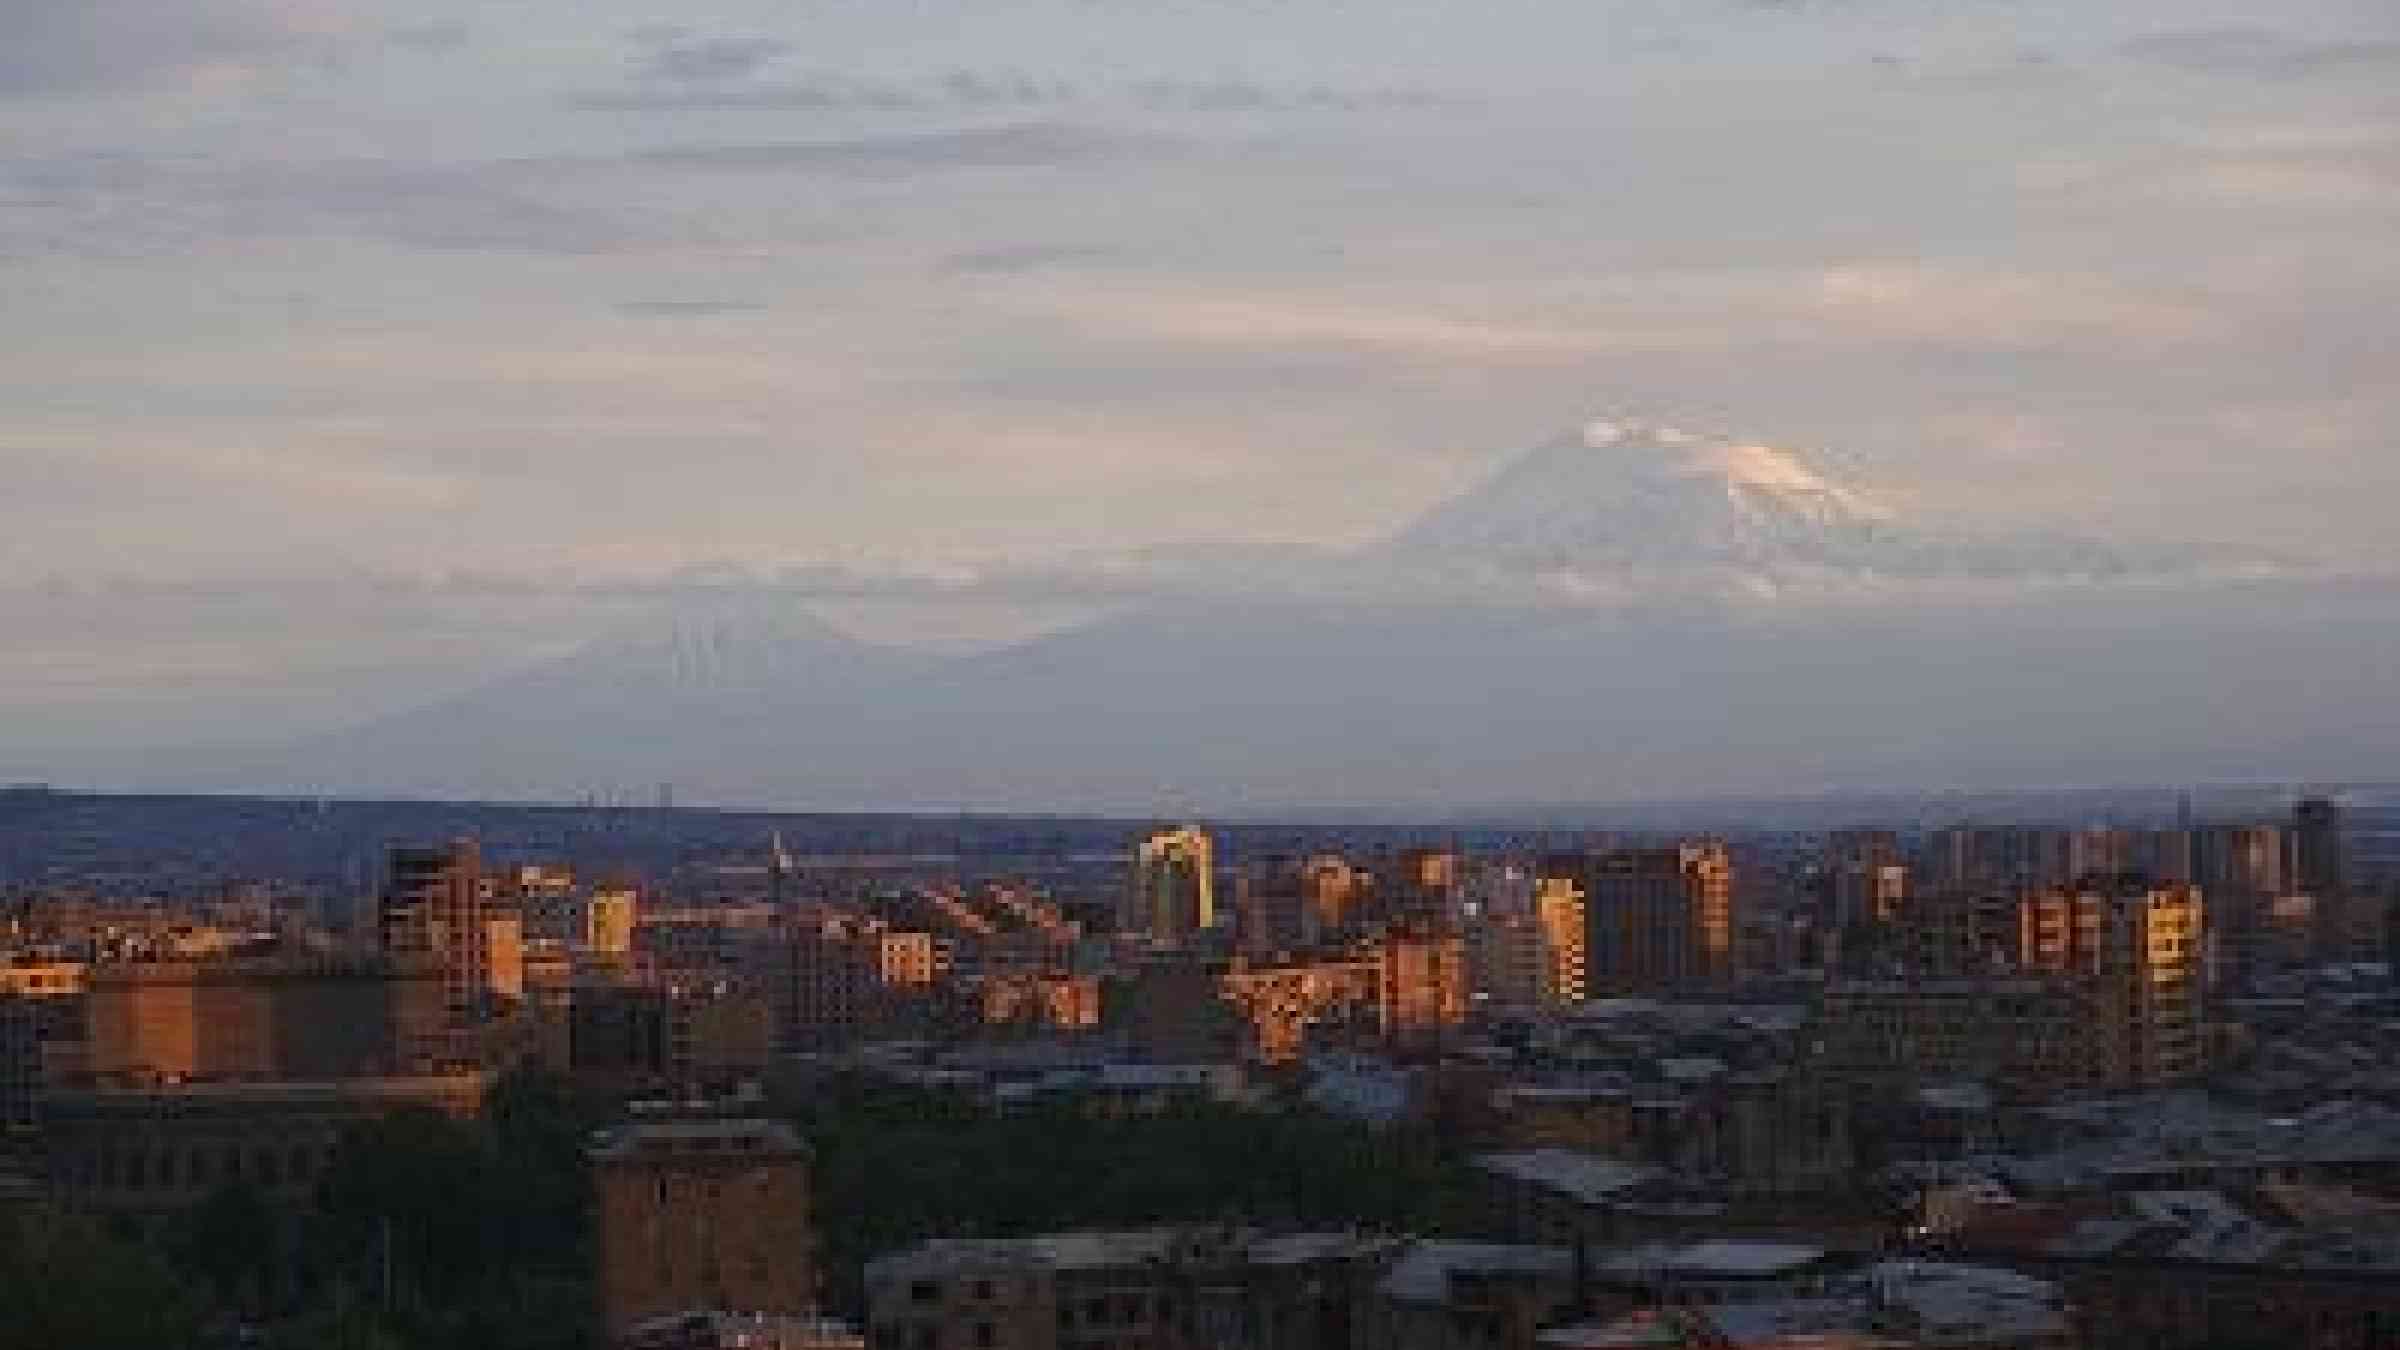 The Armenian capital Yerevan will host a sub-Regional Conference on Disaster Risk Reduction, June 26-29